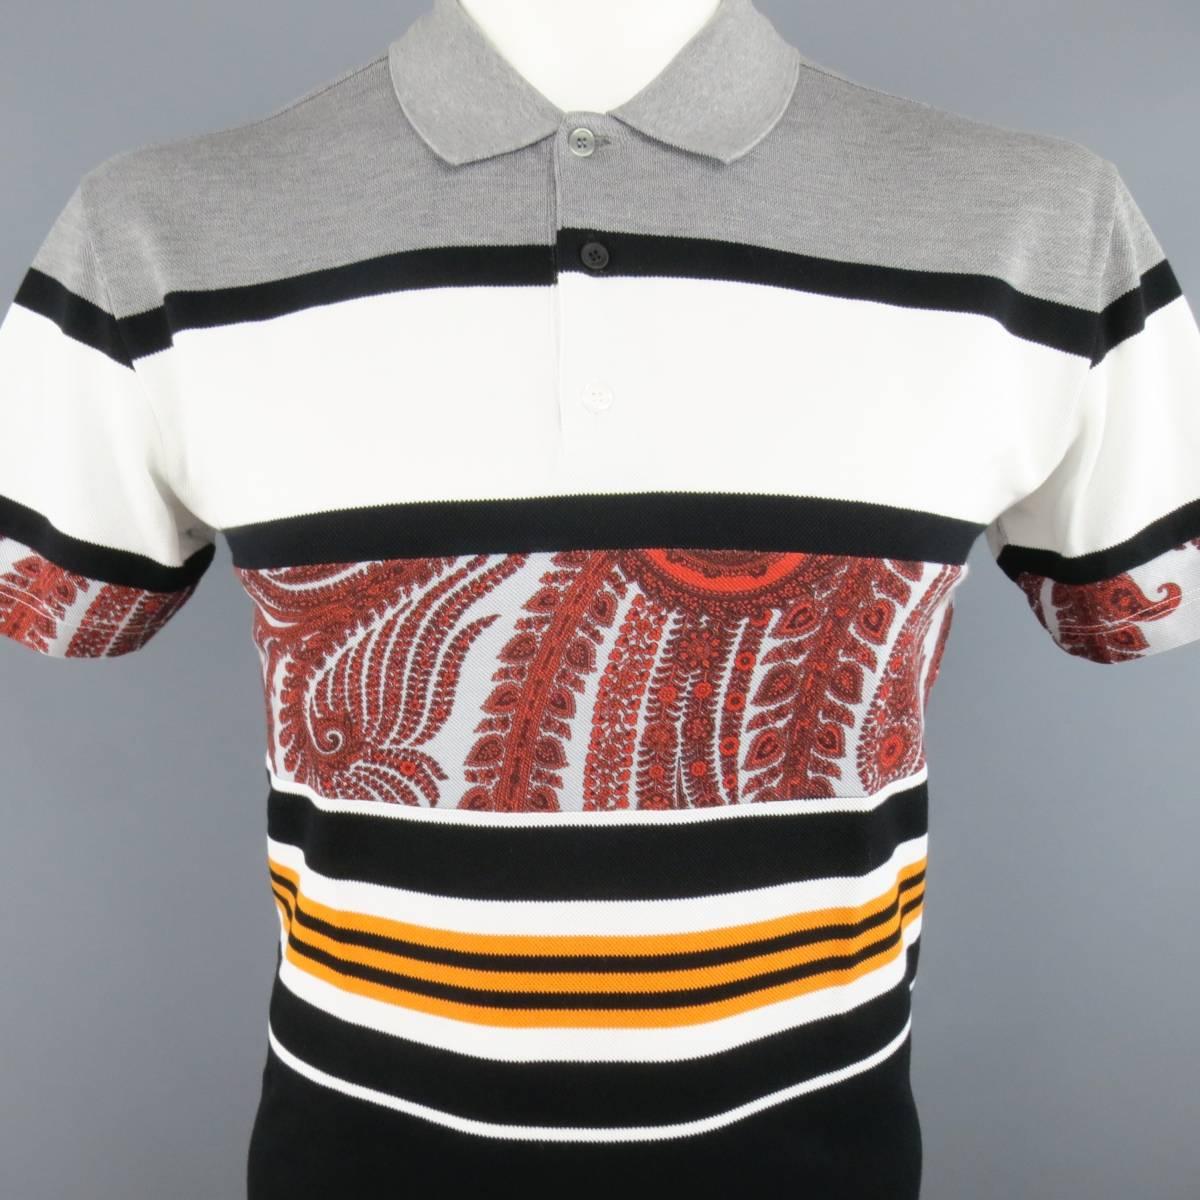 GIVENCHY by Riccardo Tisci polo comes in classic cotton pique with a gray, orange, black, and white paisley striped panel pattern and signature T cross stitch back. Made in Italy.
 
Excellent Pre-Owned Condition.
Marked: XL
 
Measurements:
